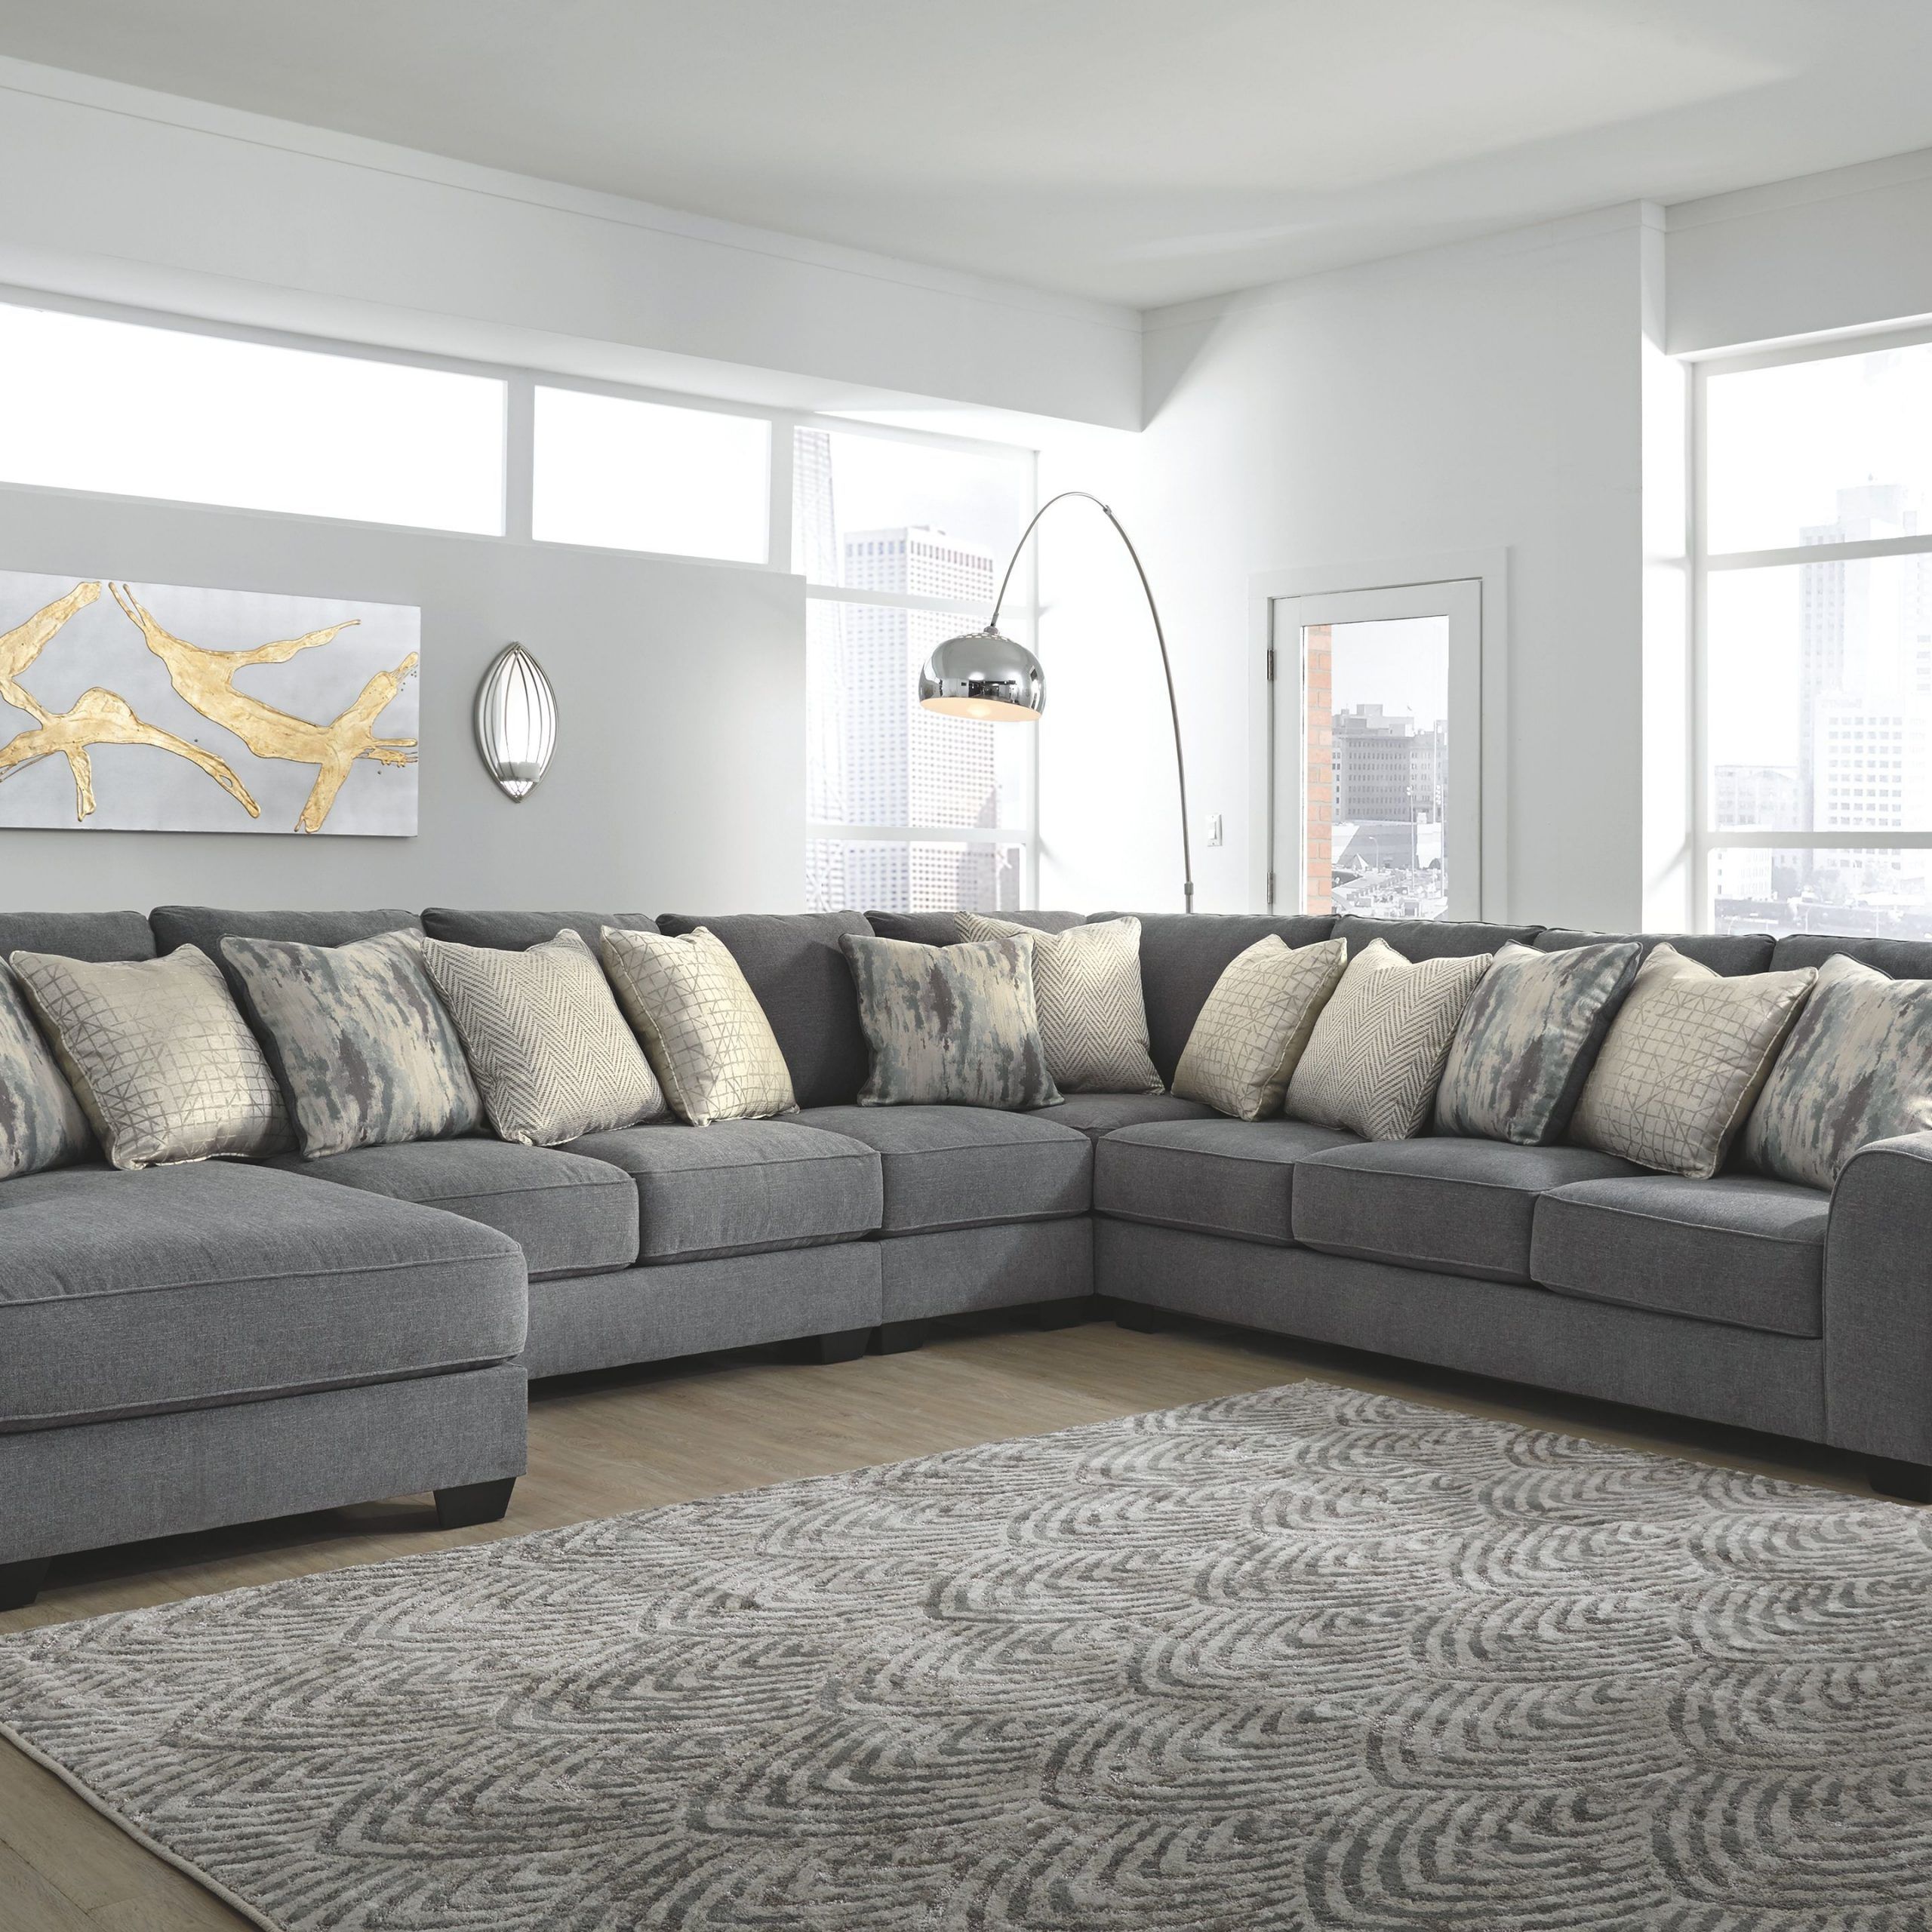 5 Piece Console Tables Throughout Well Known Castano 5 Piece Sectional With Chaise (View 9 of 10)